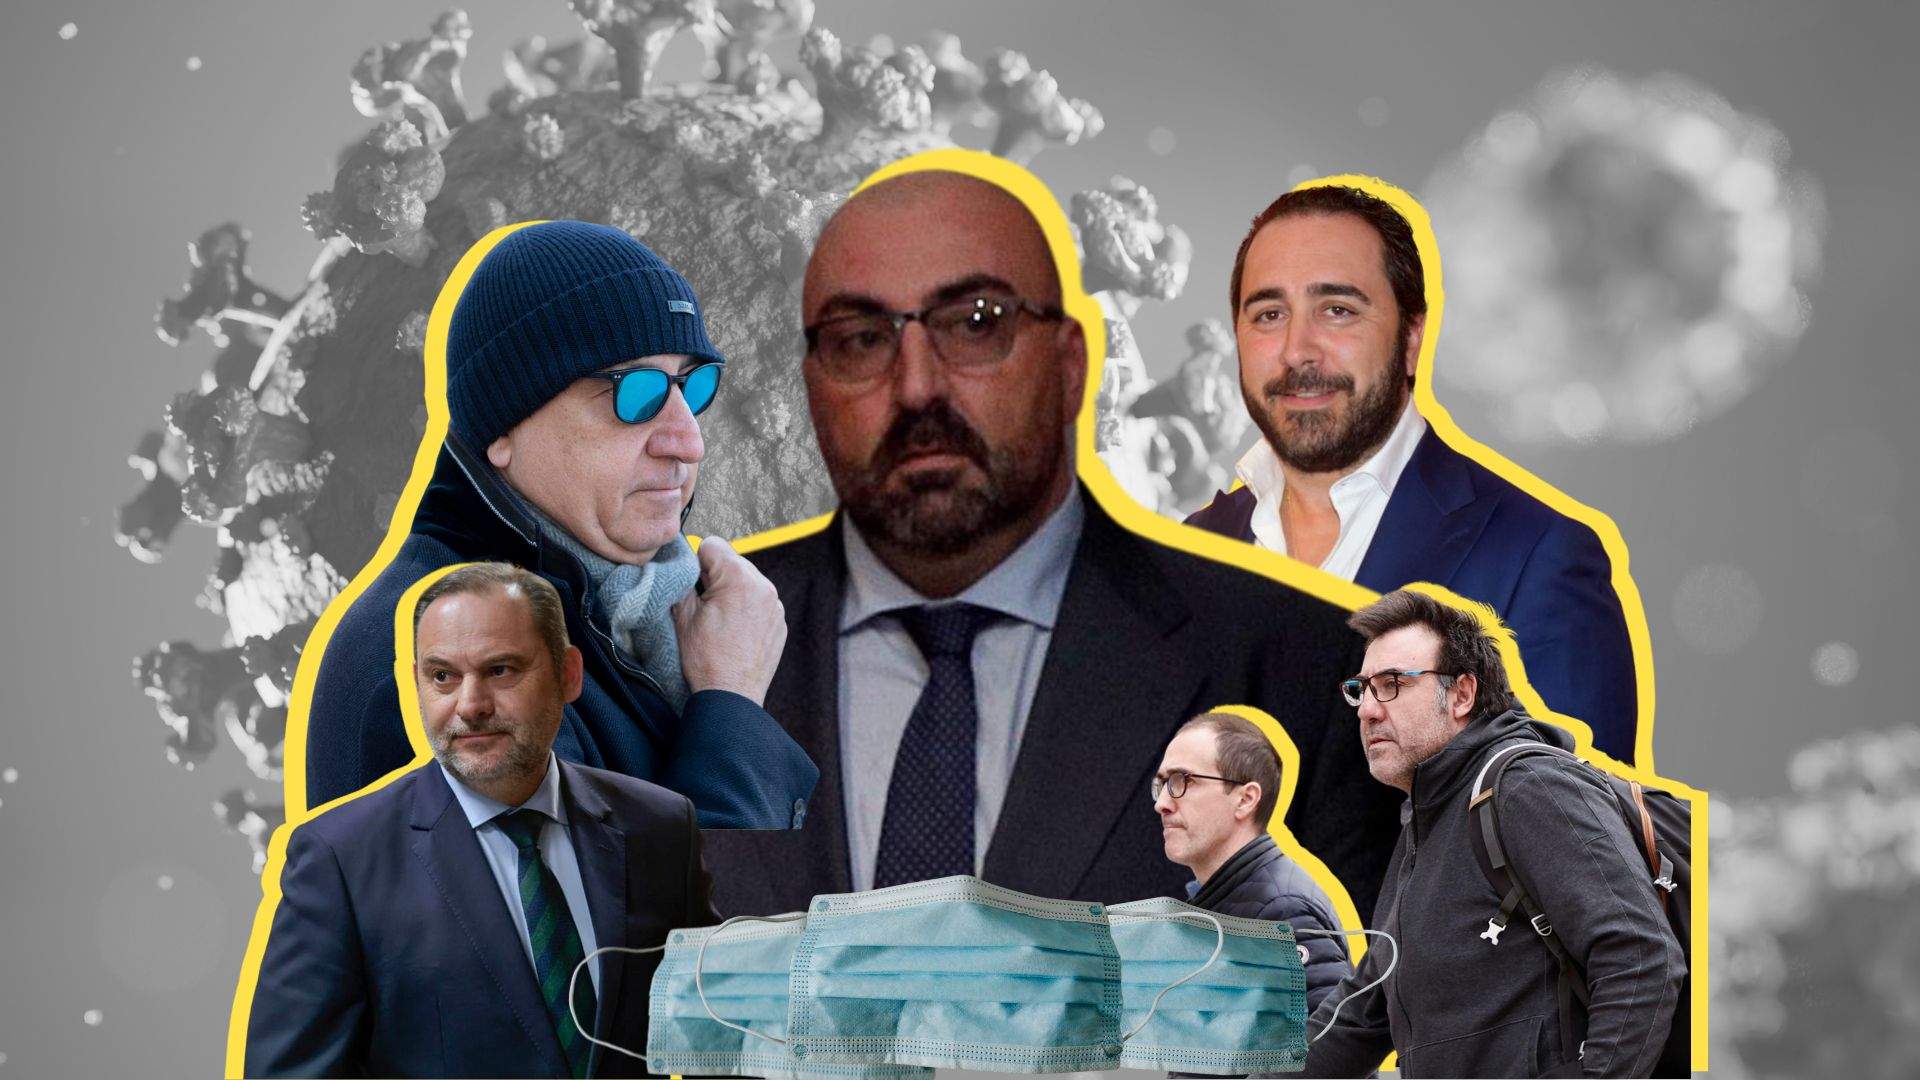 The Koldo case: who's who in Spain's face-mask corruption scandal